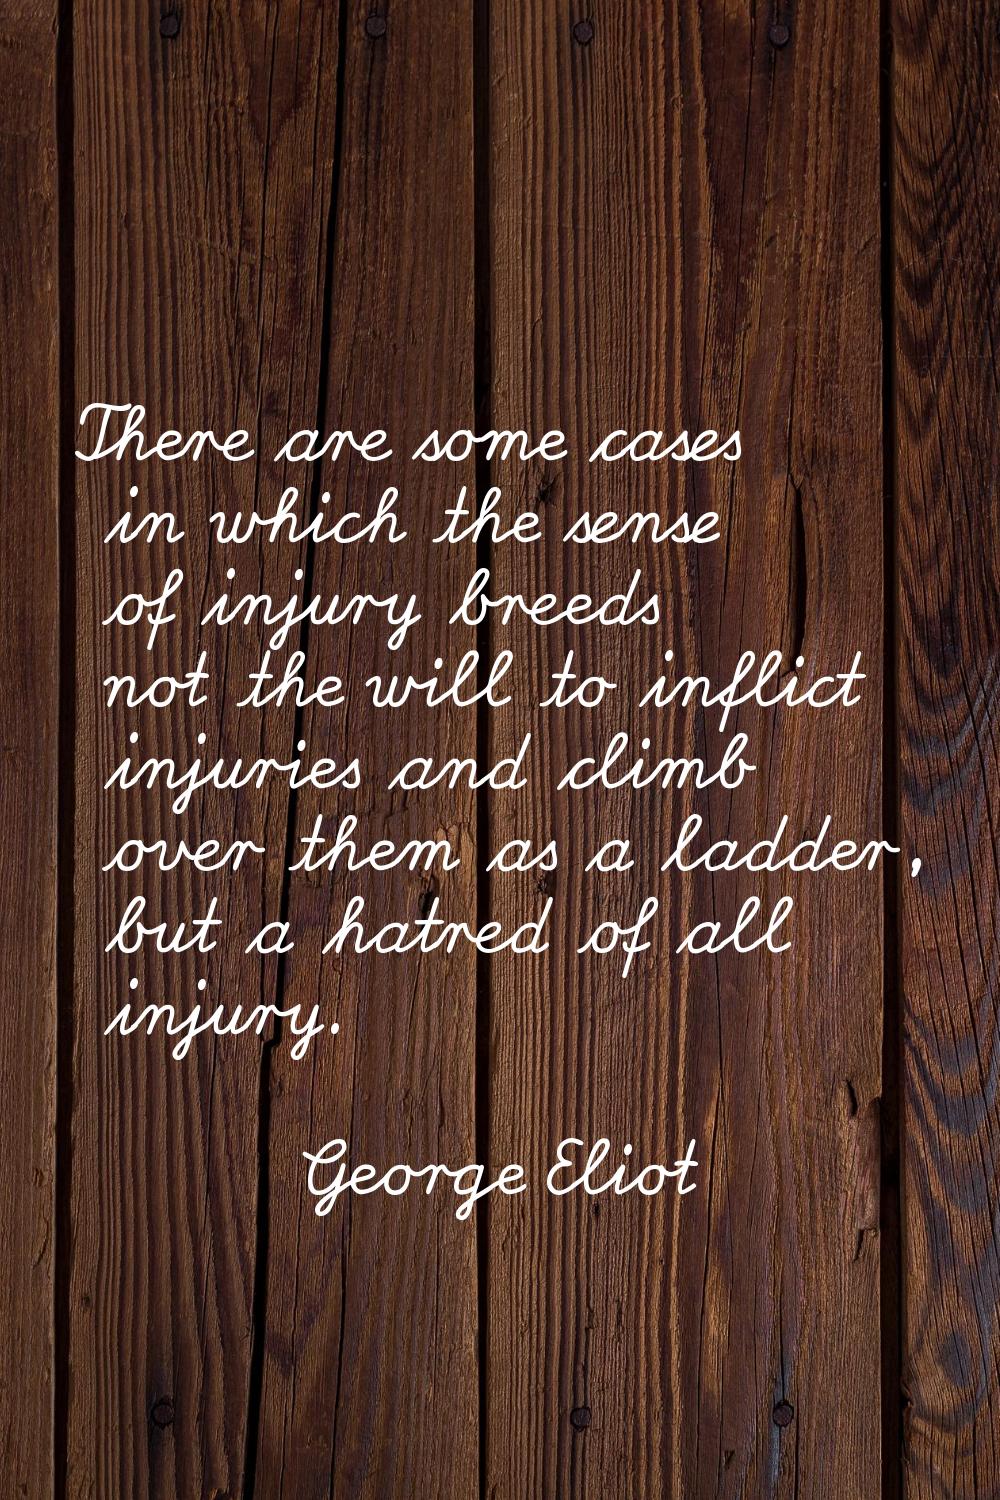 There are some cases in which the sense of injury breeds not the will to inflict injuries and climb